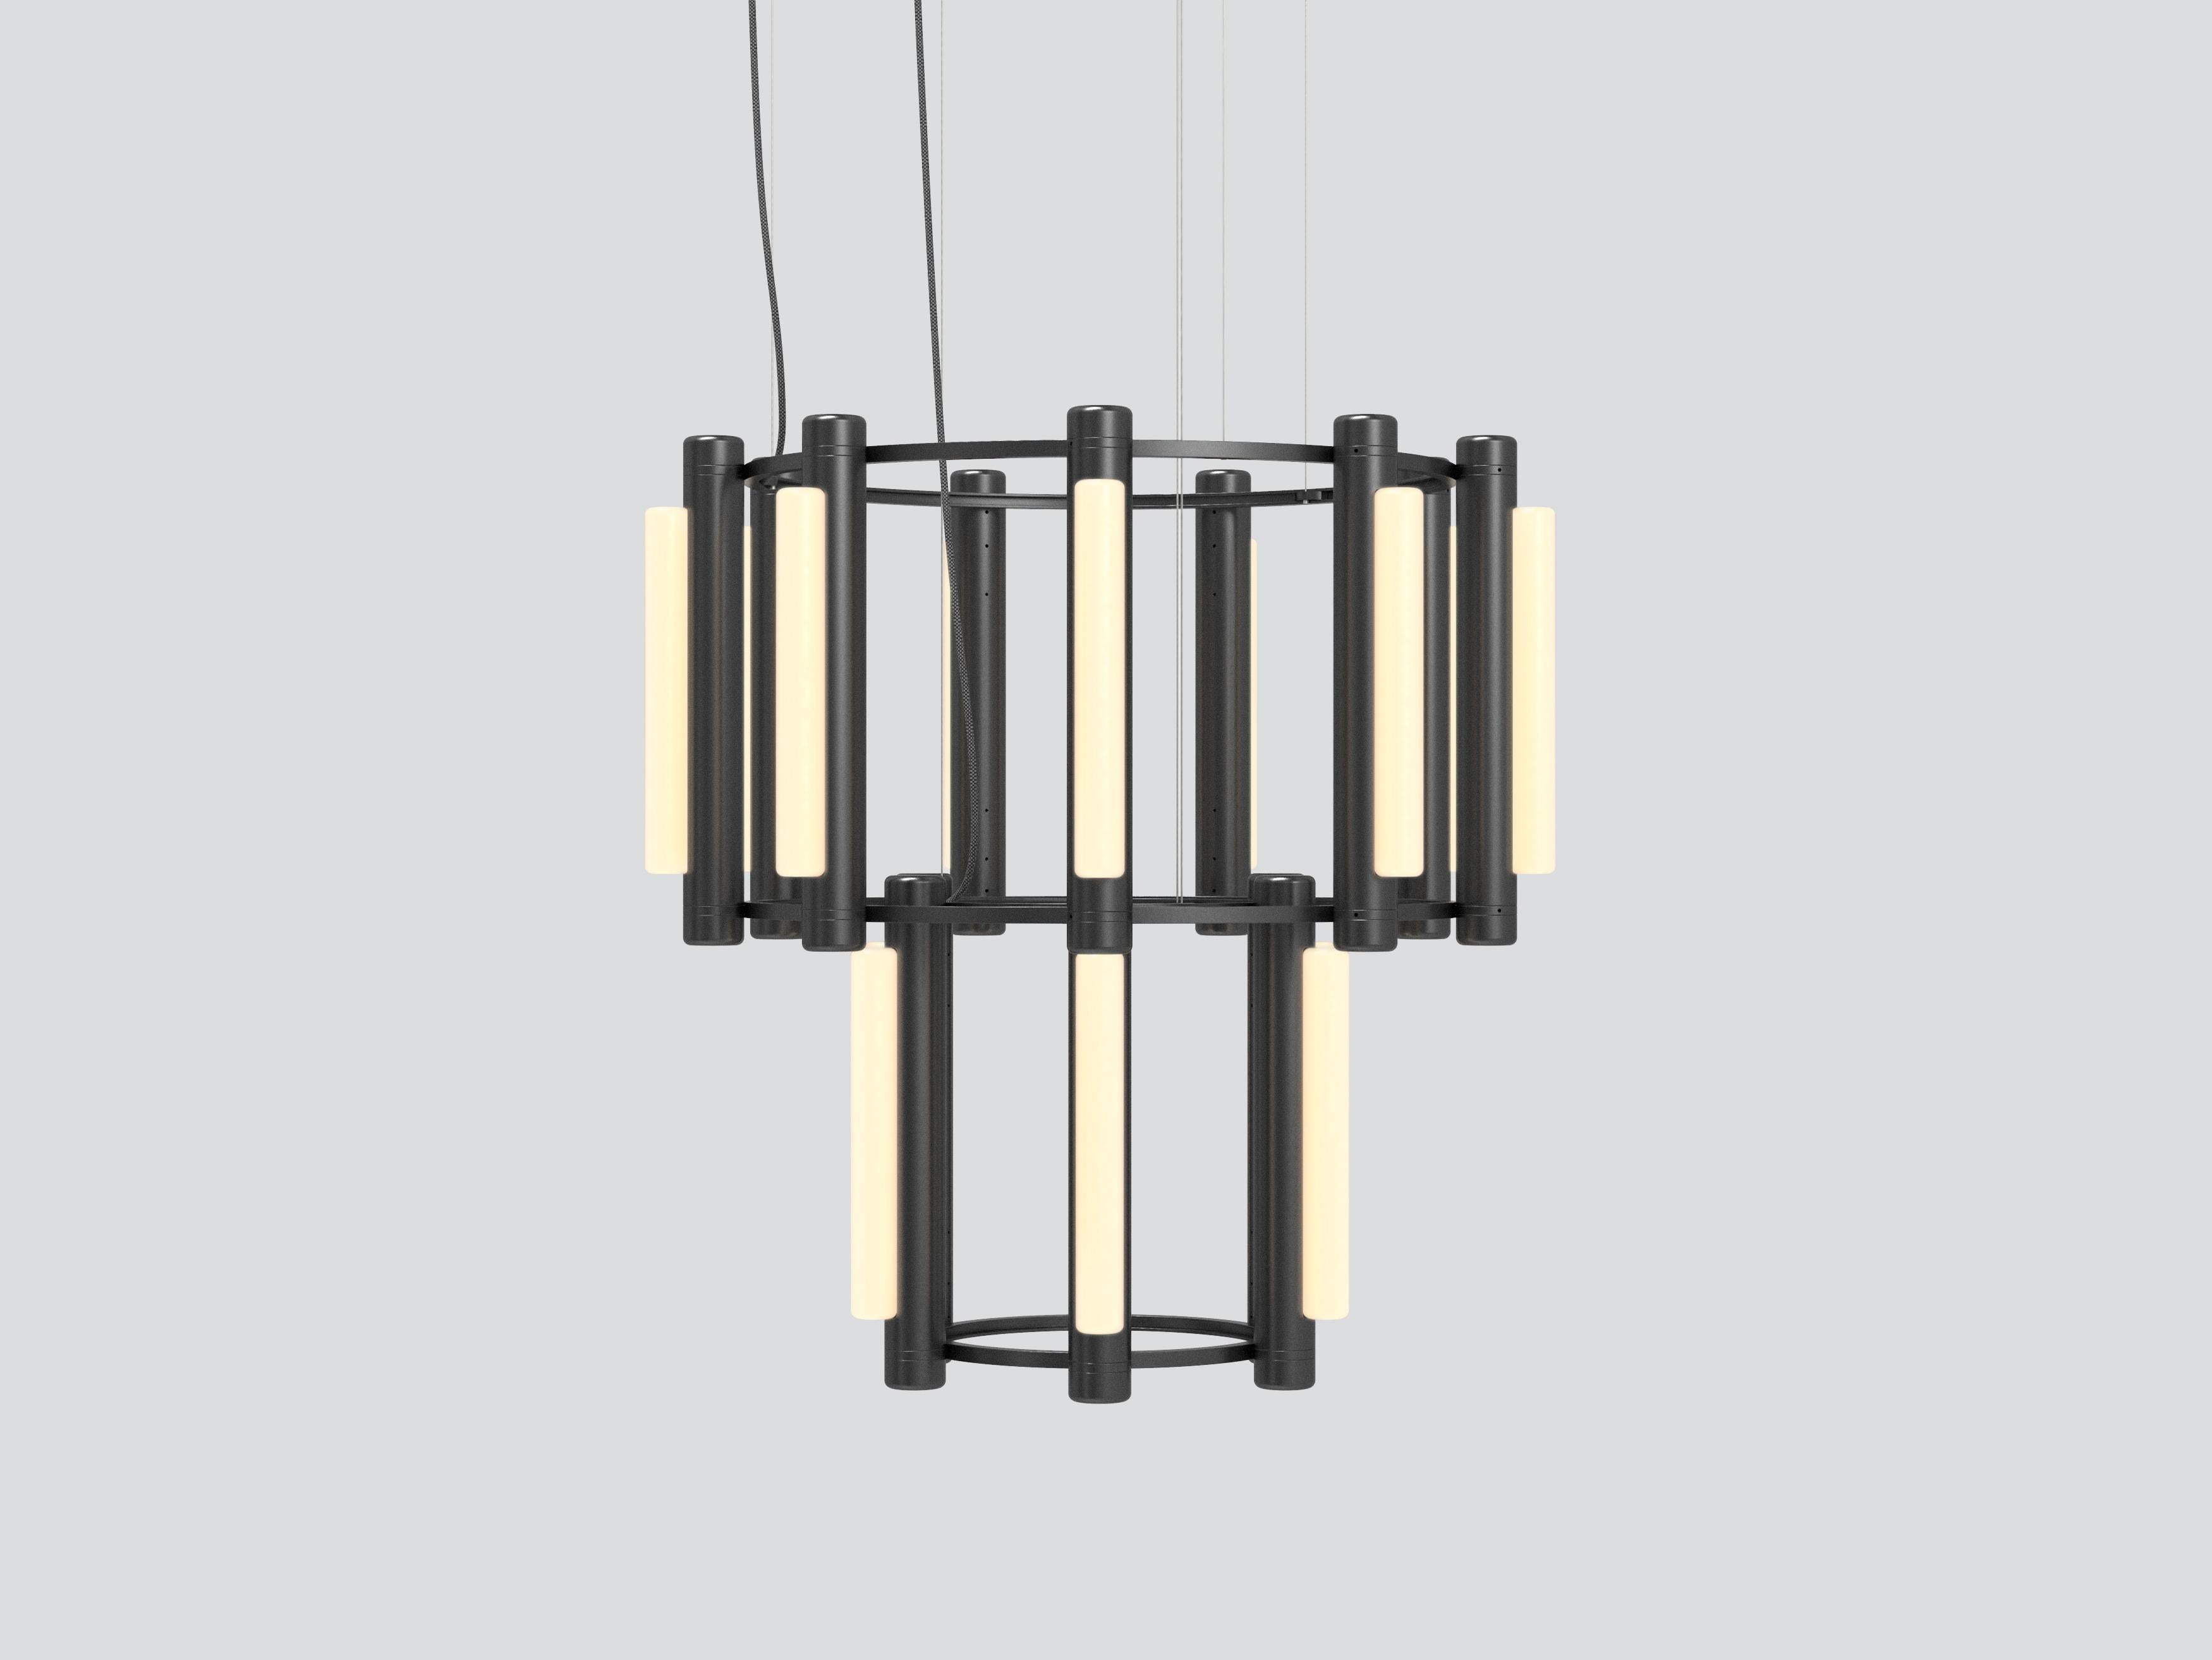 Pipeline Chandelier 7
Design: Caine Heintzman, Editor: AND Light

By definition, the Pipeline Chandelier features a cylindrical arrangement of linear illuminated sections cinched by metal hoops. Its carousel like form proposes an unconventional